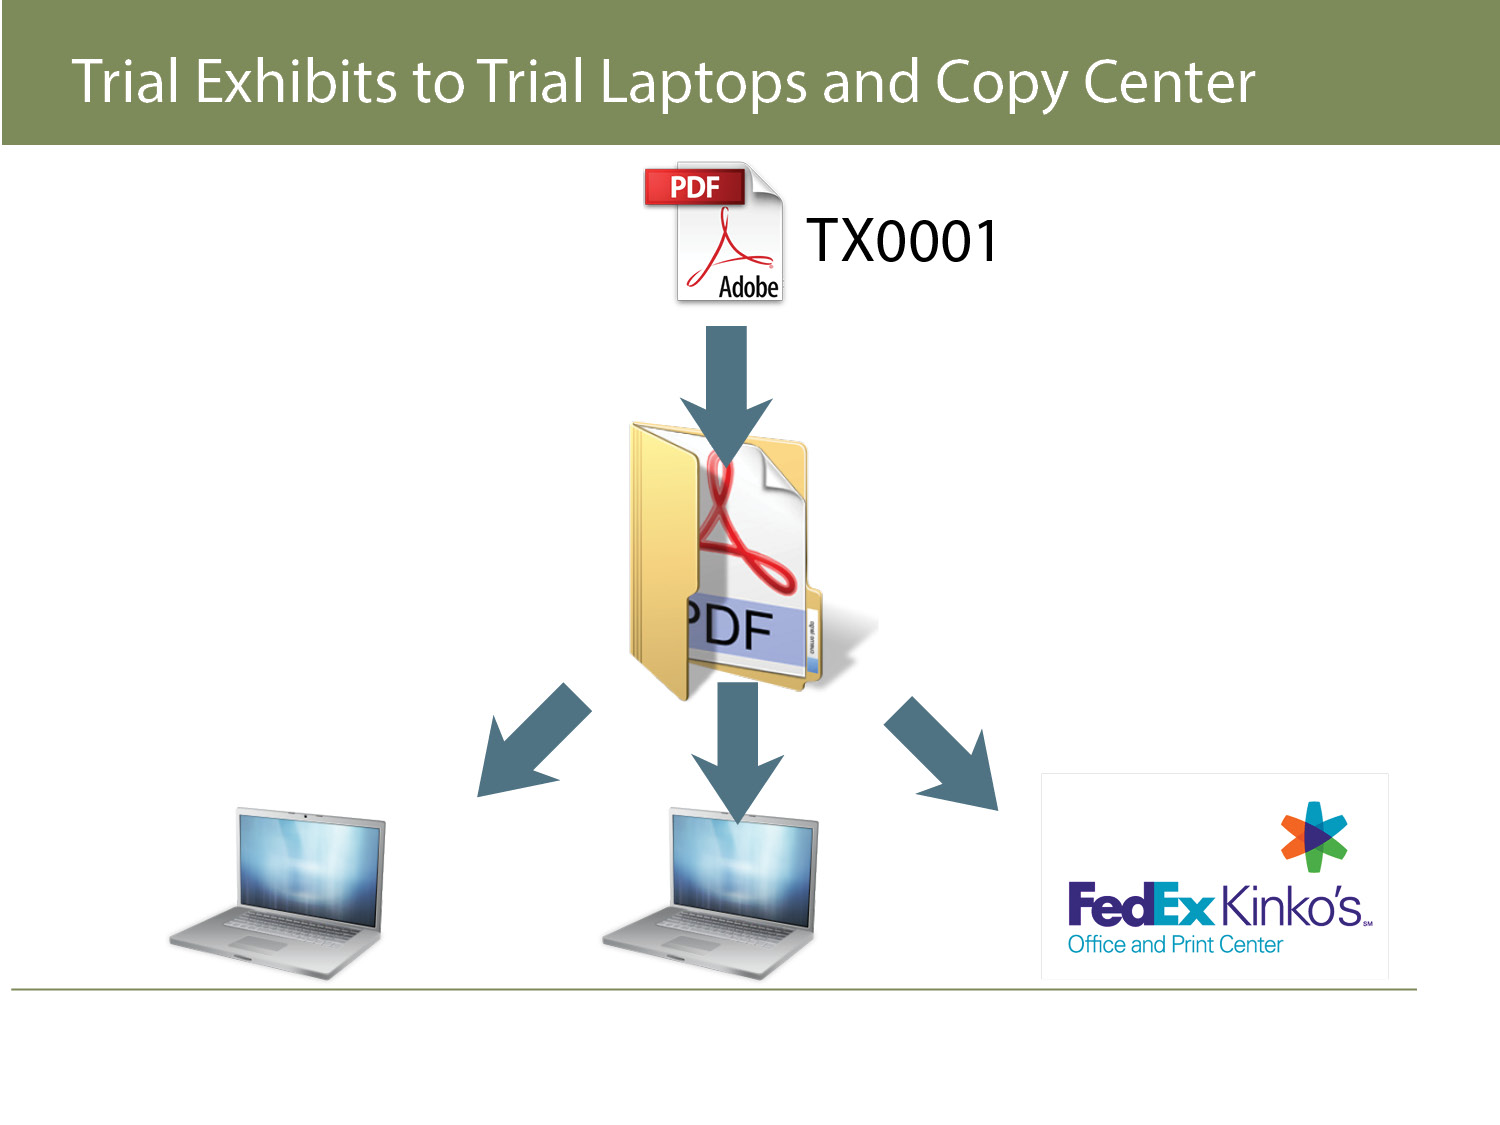 Exhibits to Trial Laptops and Copy Center